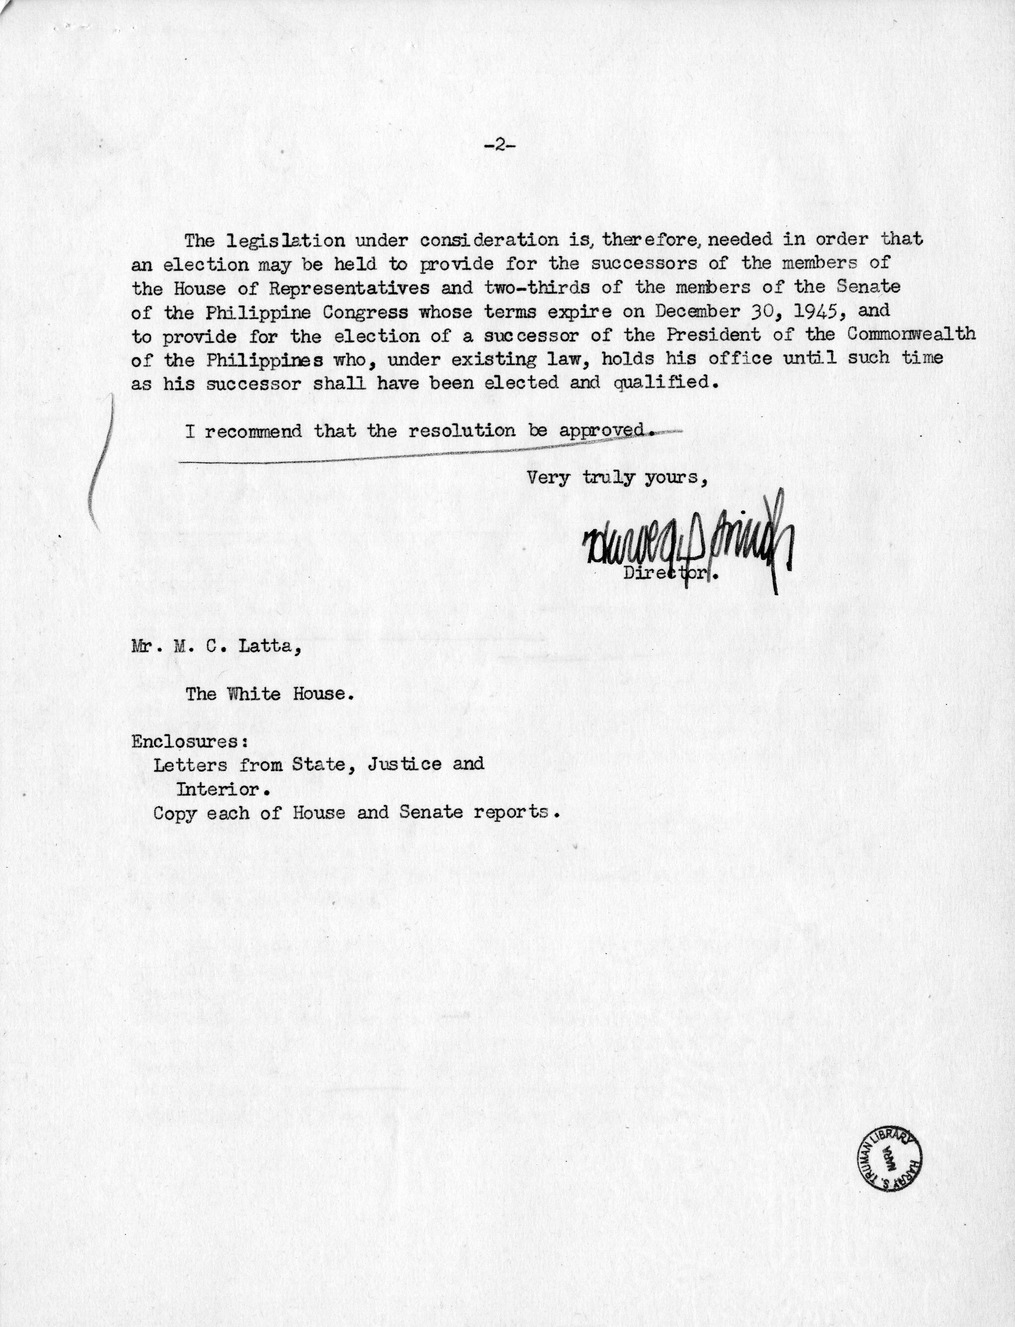 Memorandum from Harold D. Smith to M. C. Latta, S.J. Res. 119, To Provide for National Elections in the Philippine Islands, with Attachments